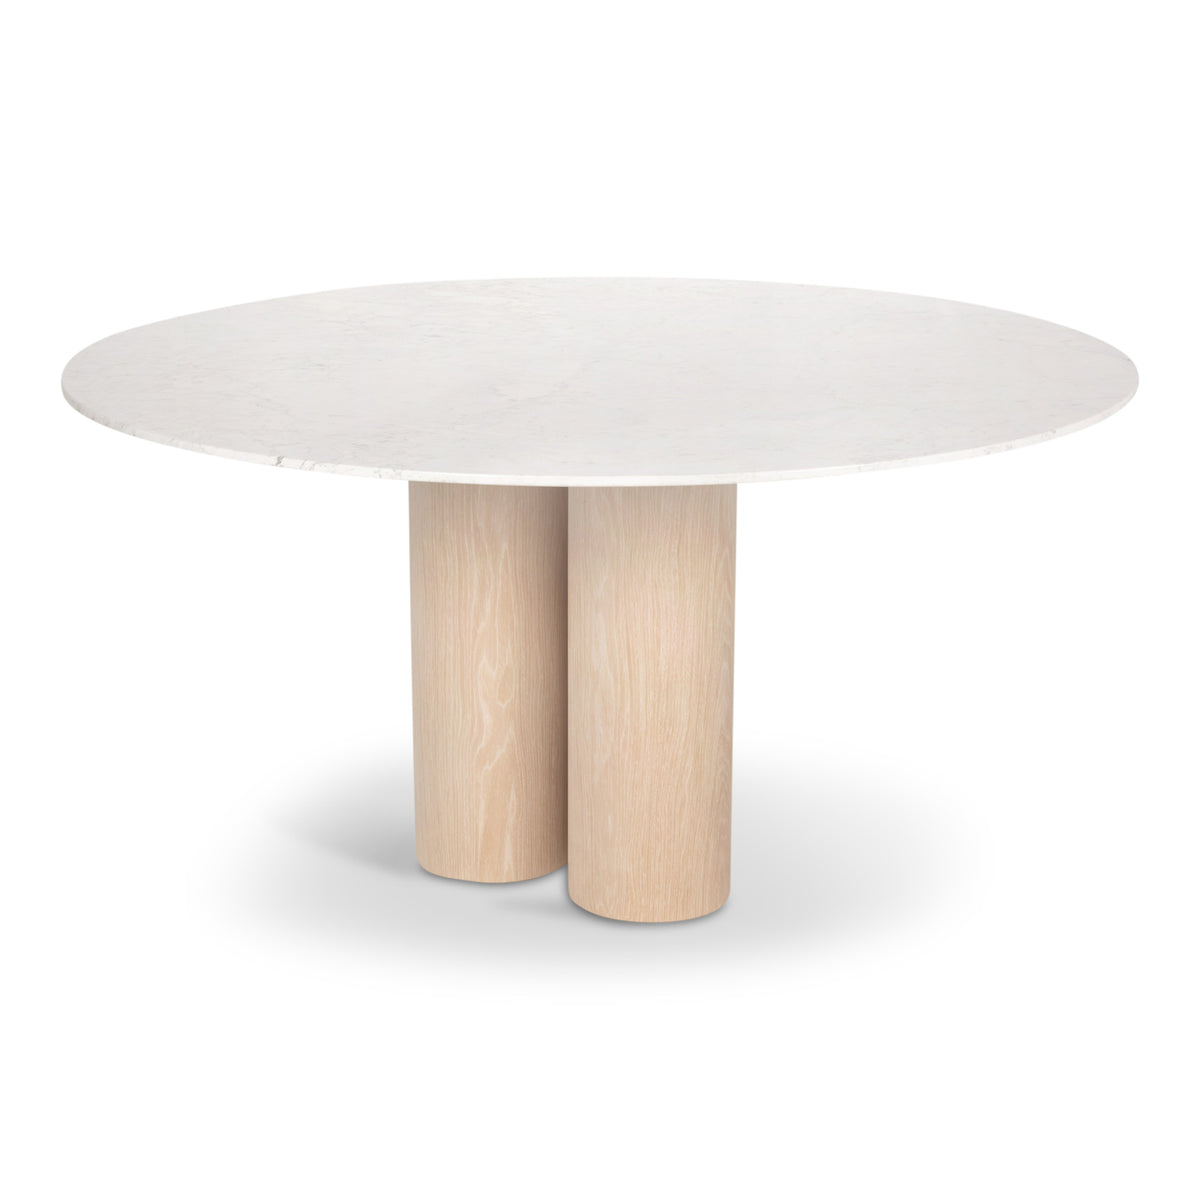 Triple Sec Marble Dining Table